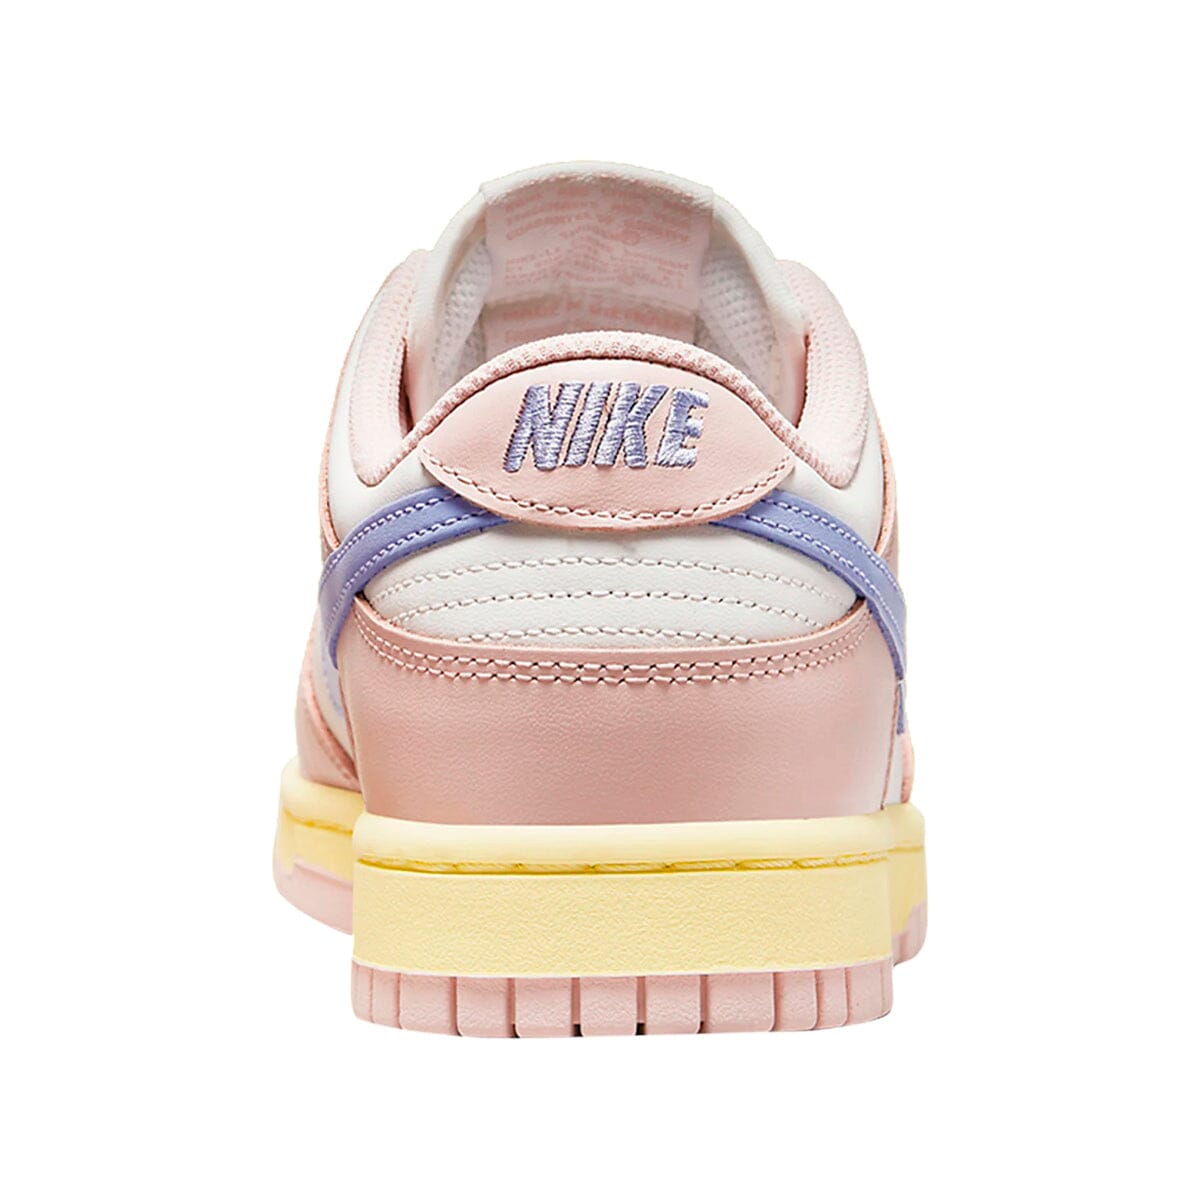 Nike Dunk Low Pink Oxford Nike Dunk Low Blizz Sneakers 